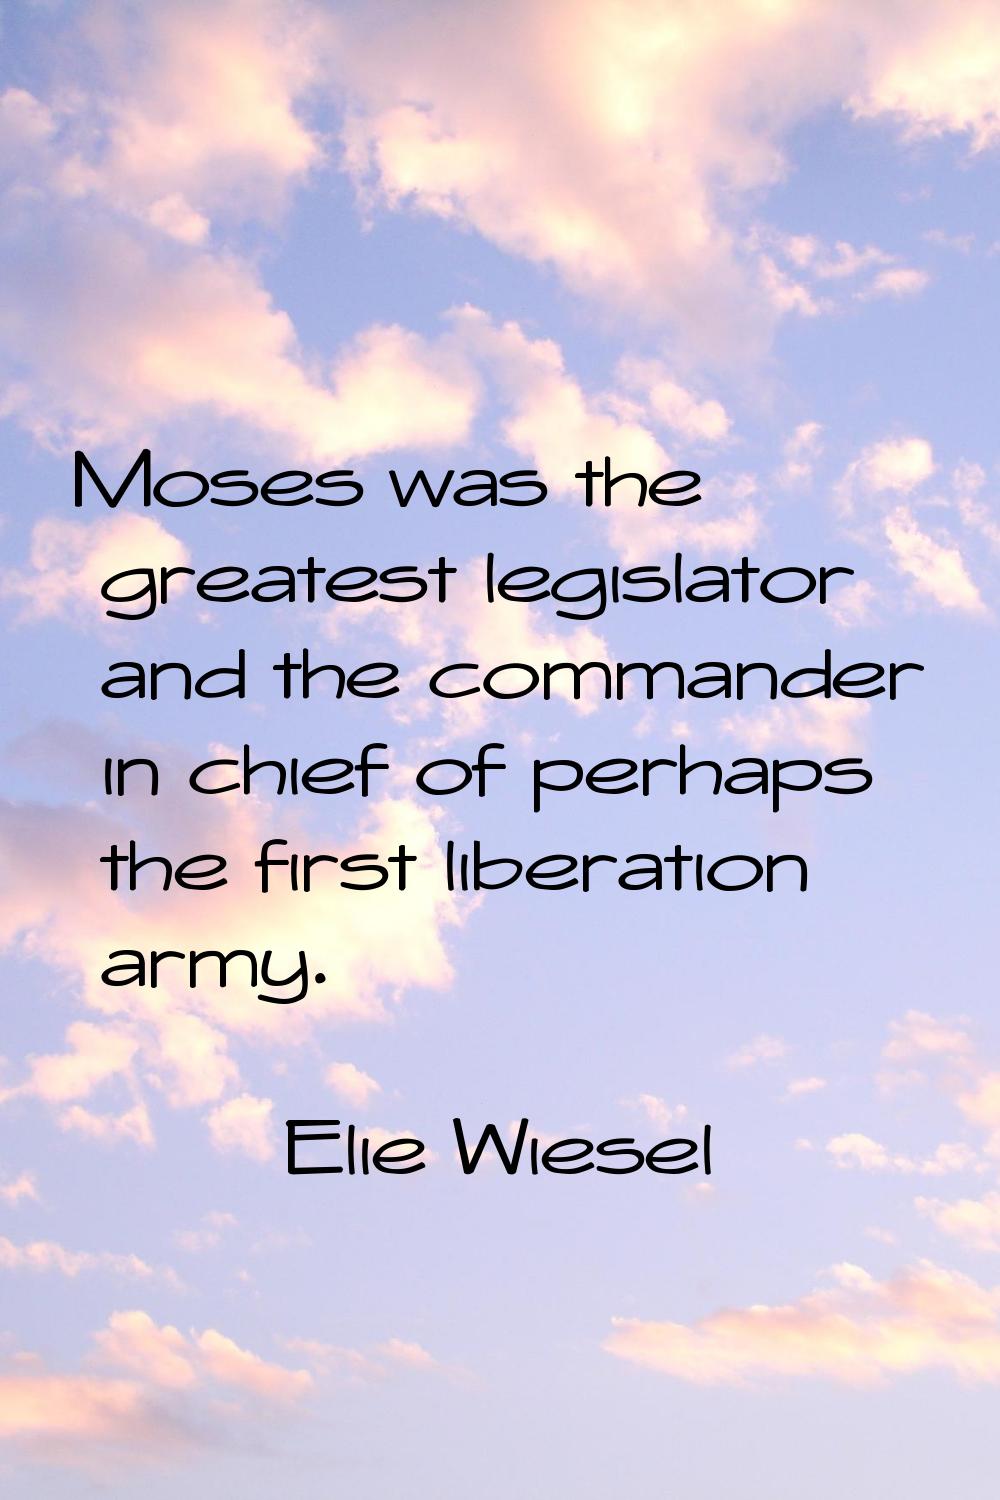 Moses was the greatest legislator and the commander in chief of perhaps the first liberation army.